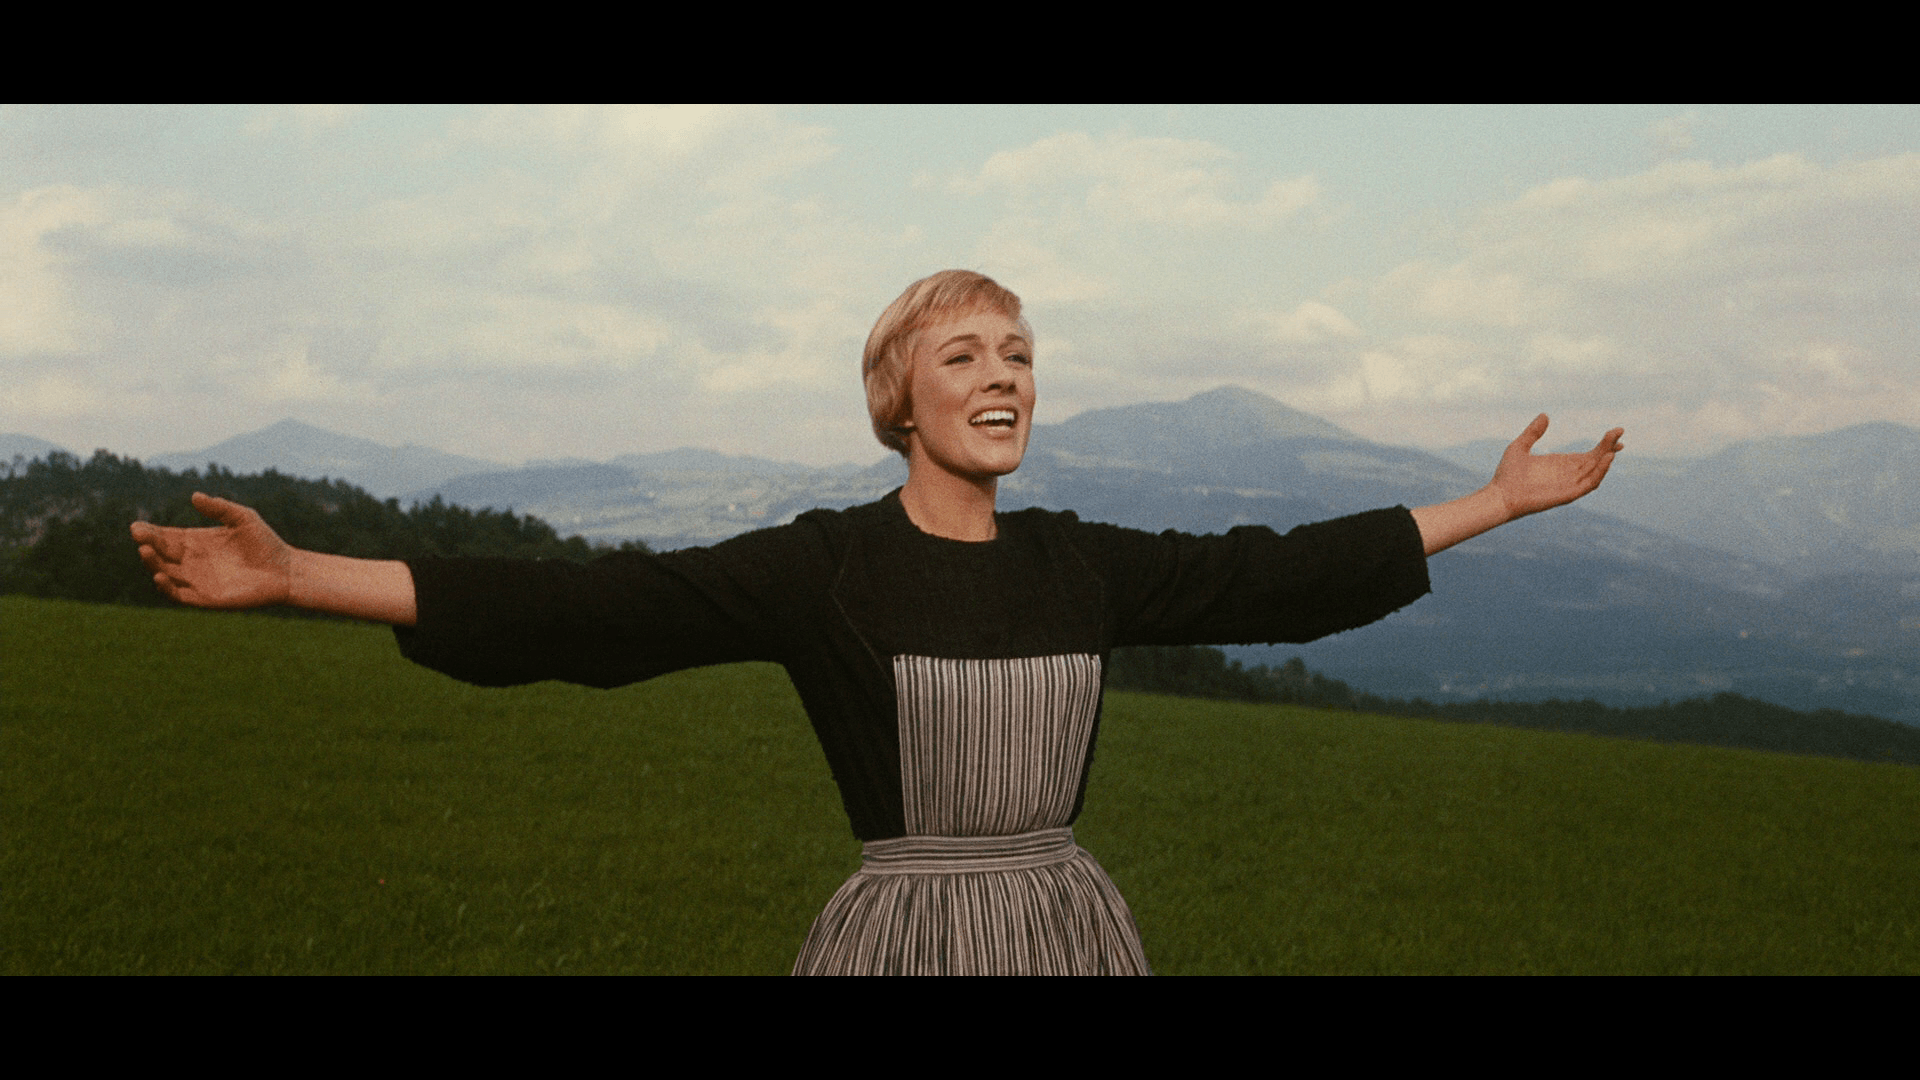 The Sound Of Music Wallpaper 20 X 1080